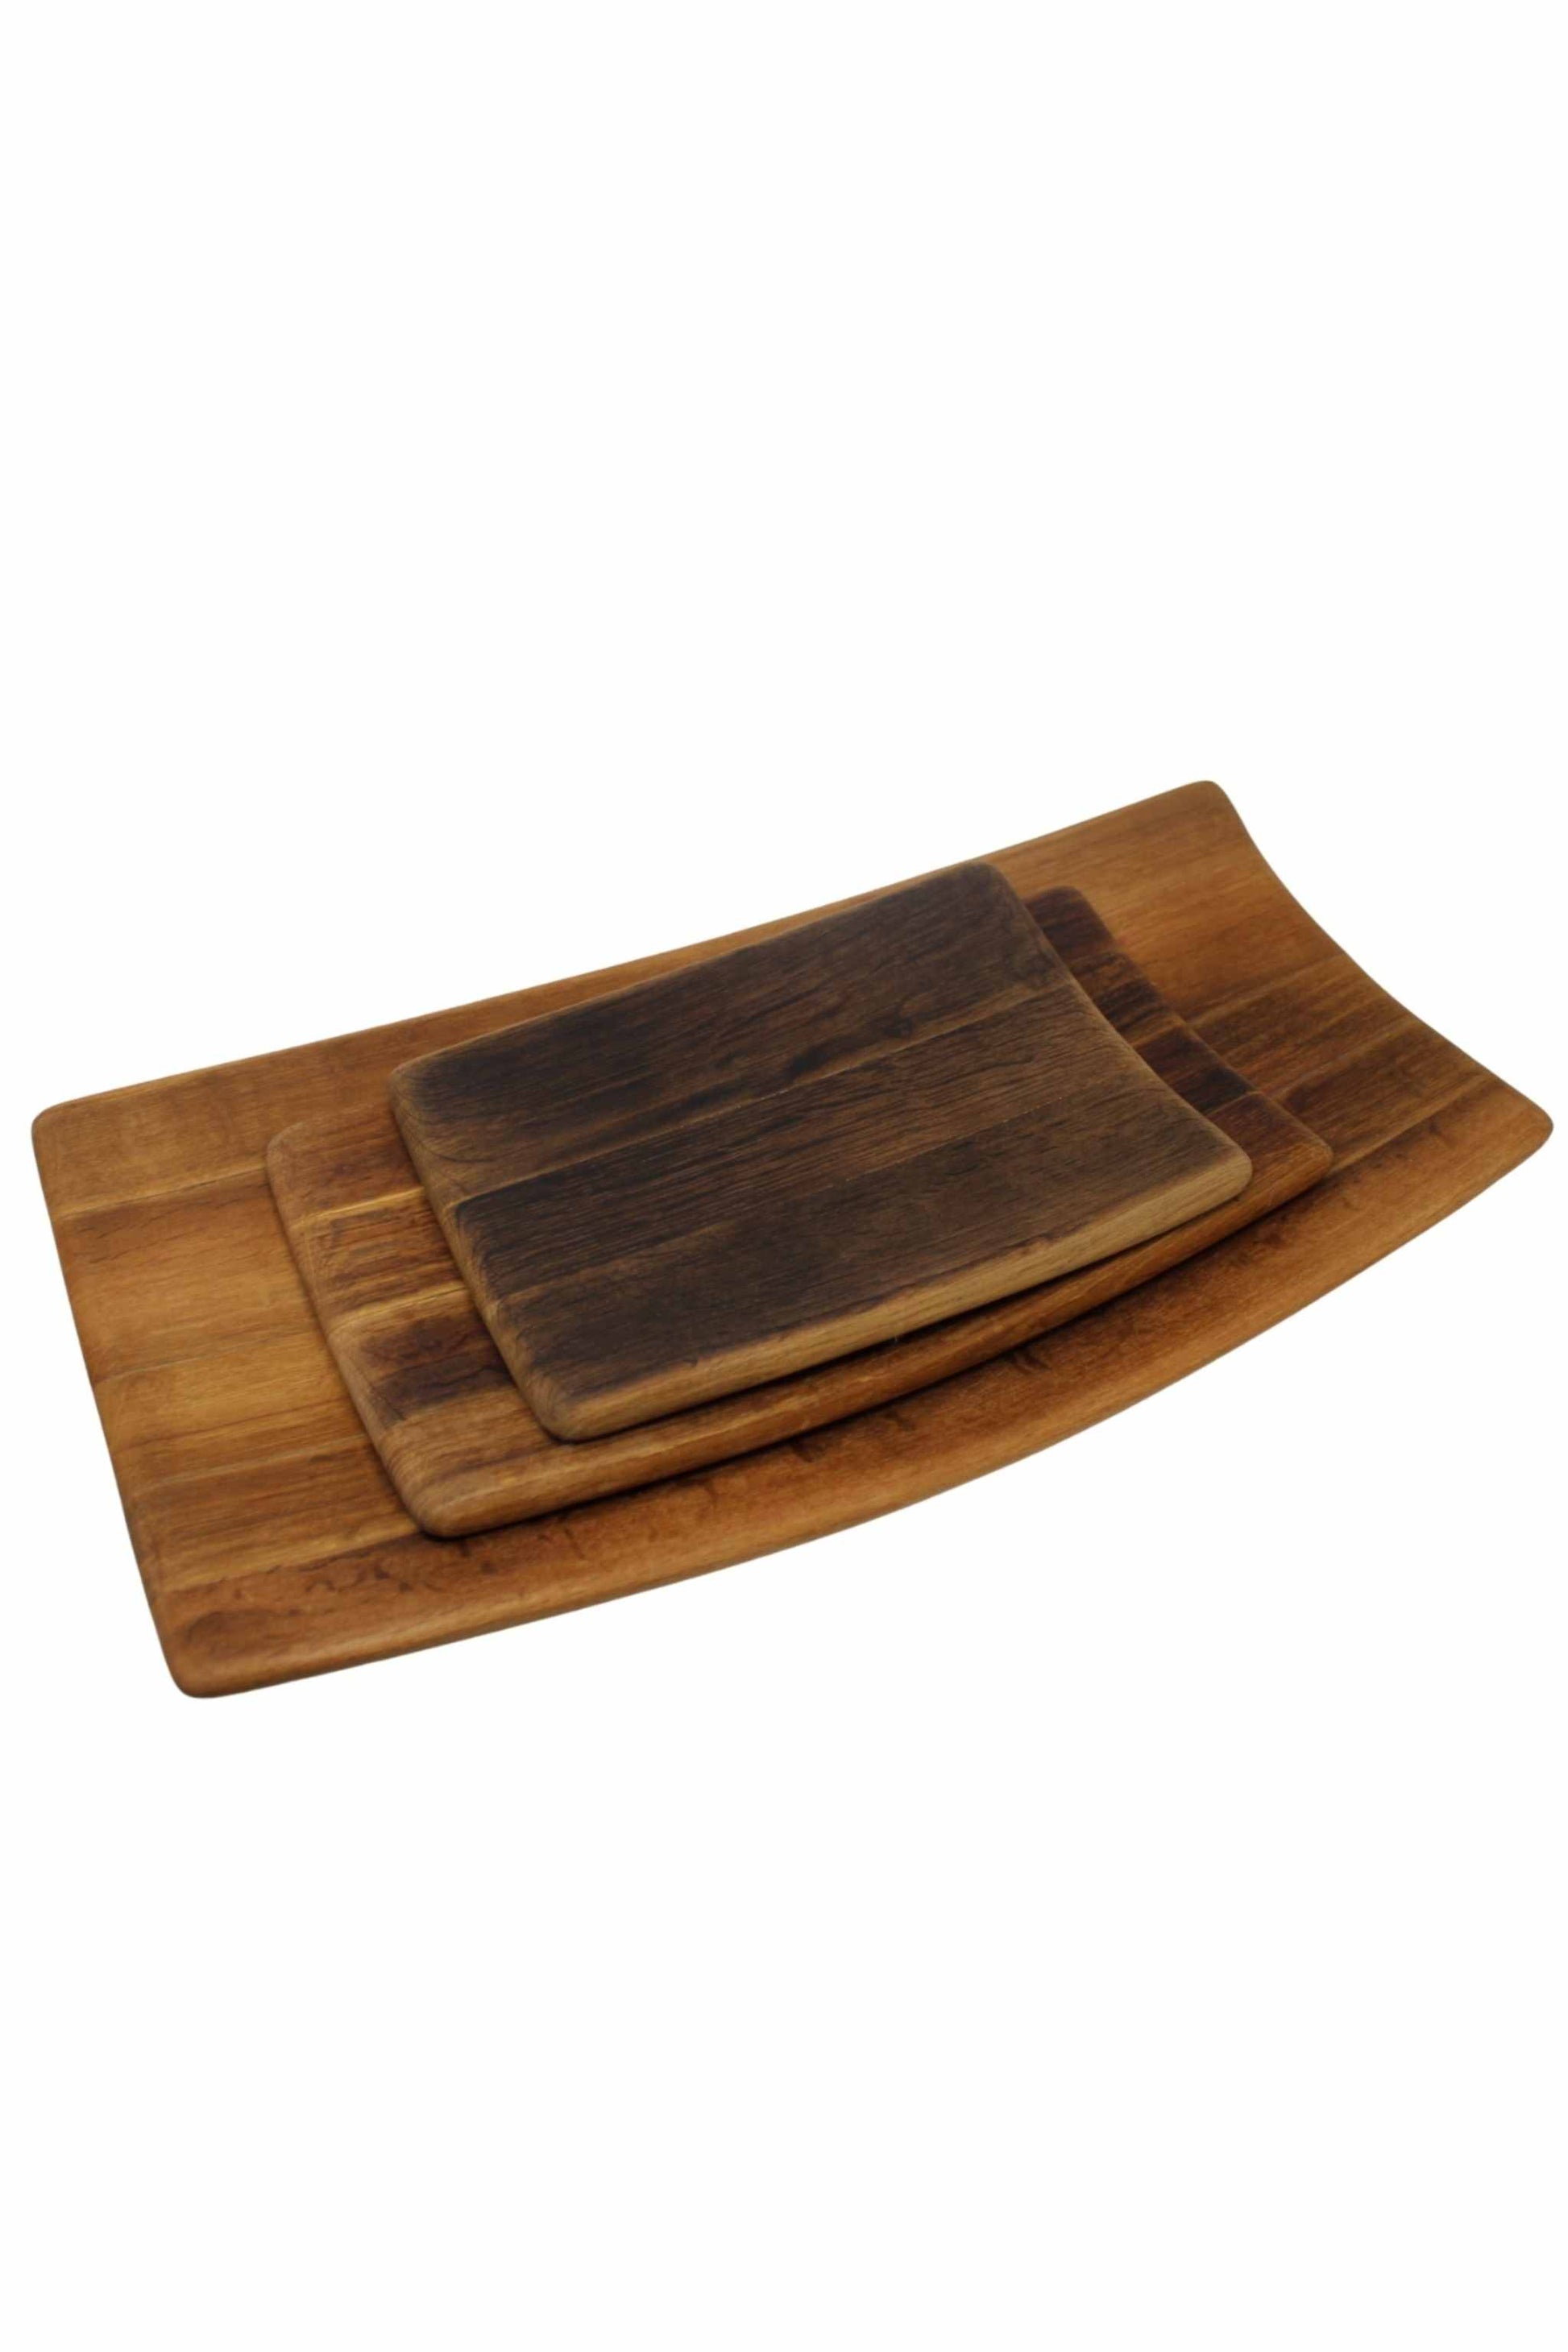 Three sizes of wine barrel platters grouped together. 